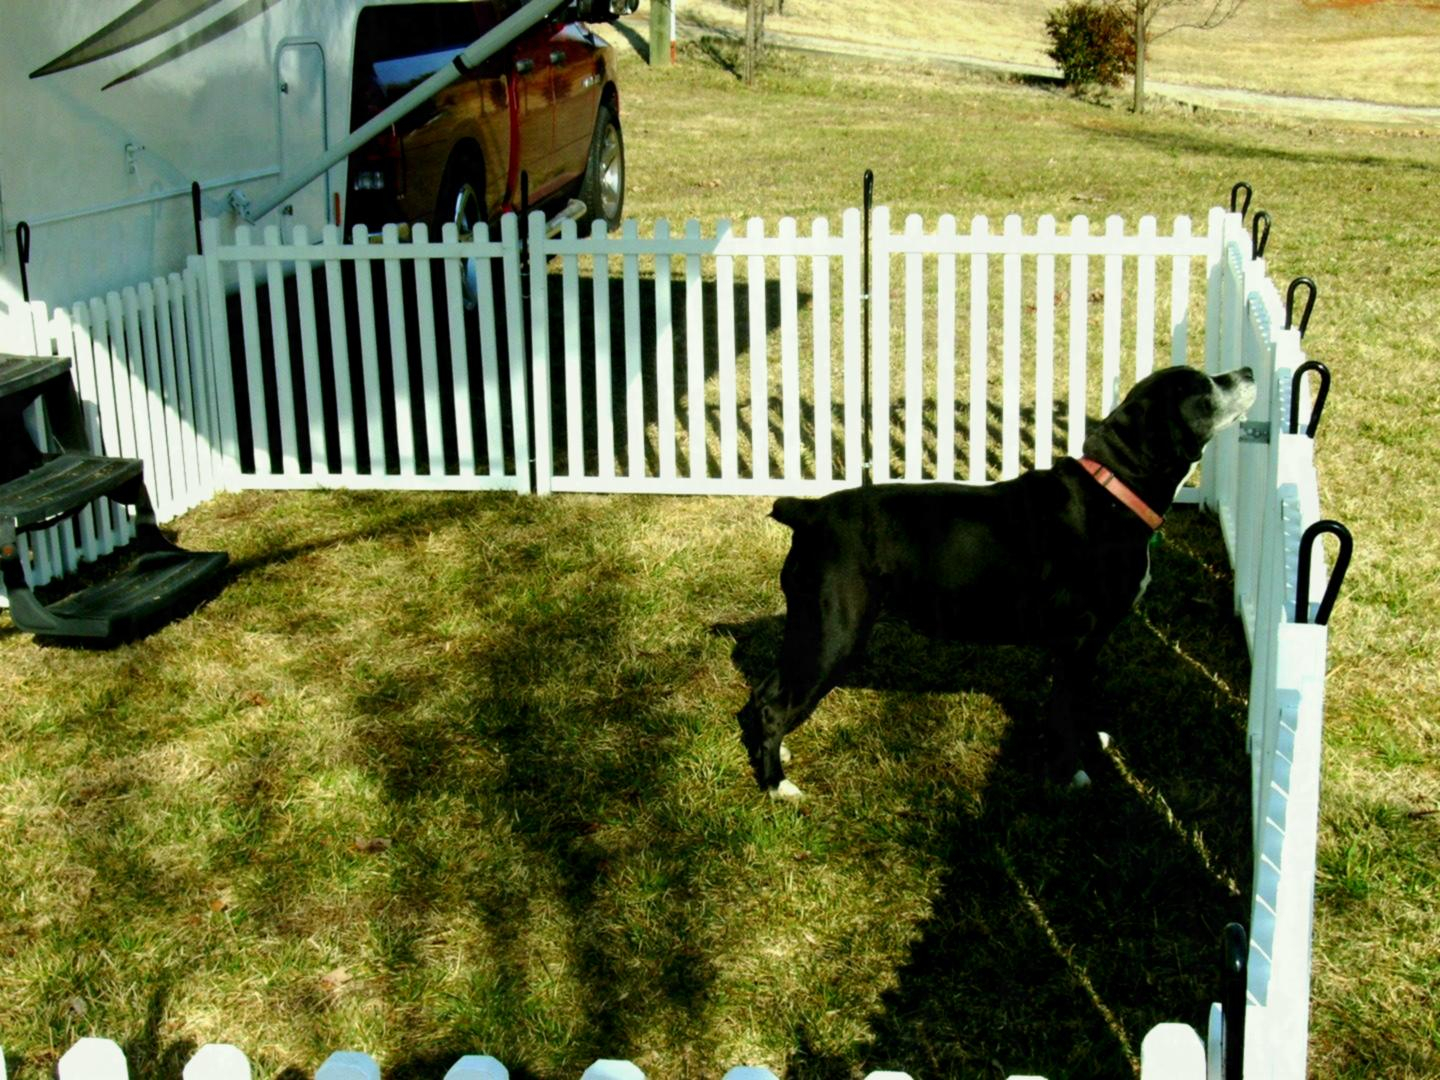 Portable Dog Fence For Camping Peiranos Fences Yard Landscaping intended for dimensions 1440 X 1080